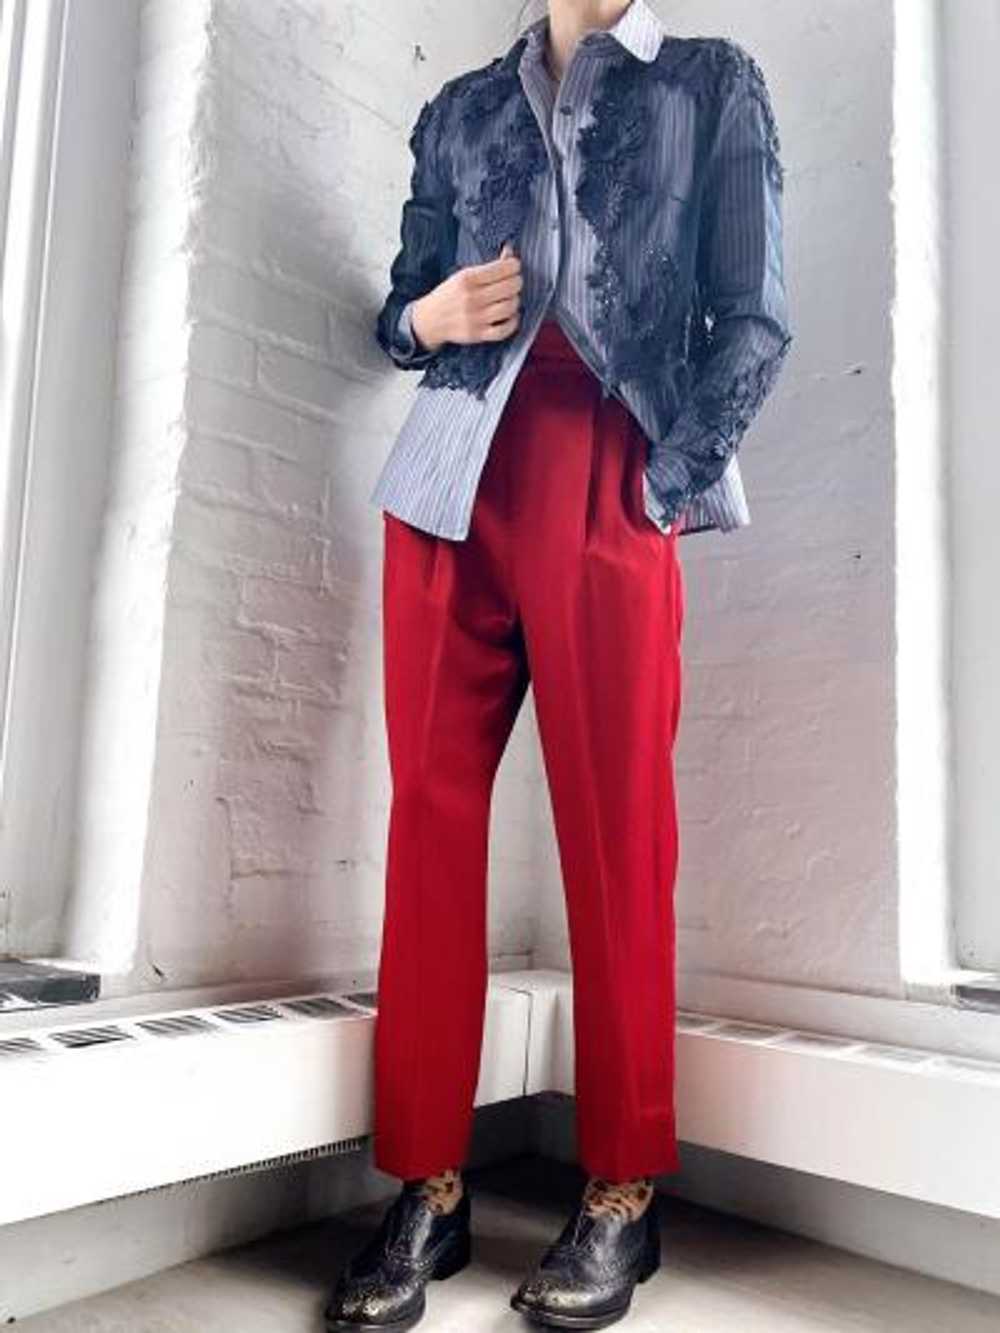 incredible satin rouge trousers - image 3